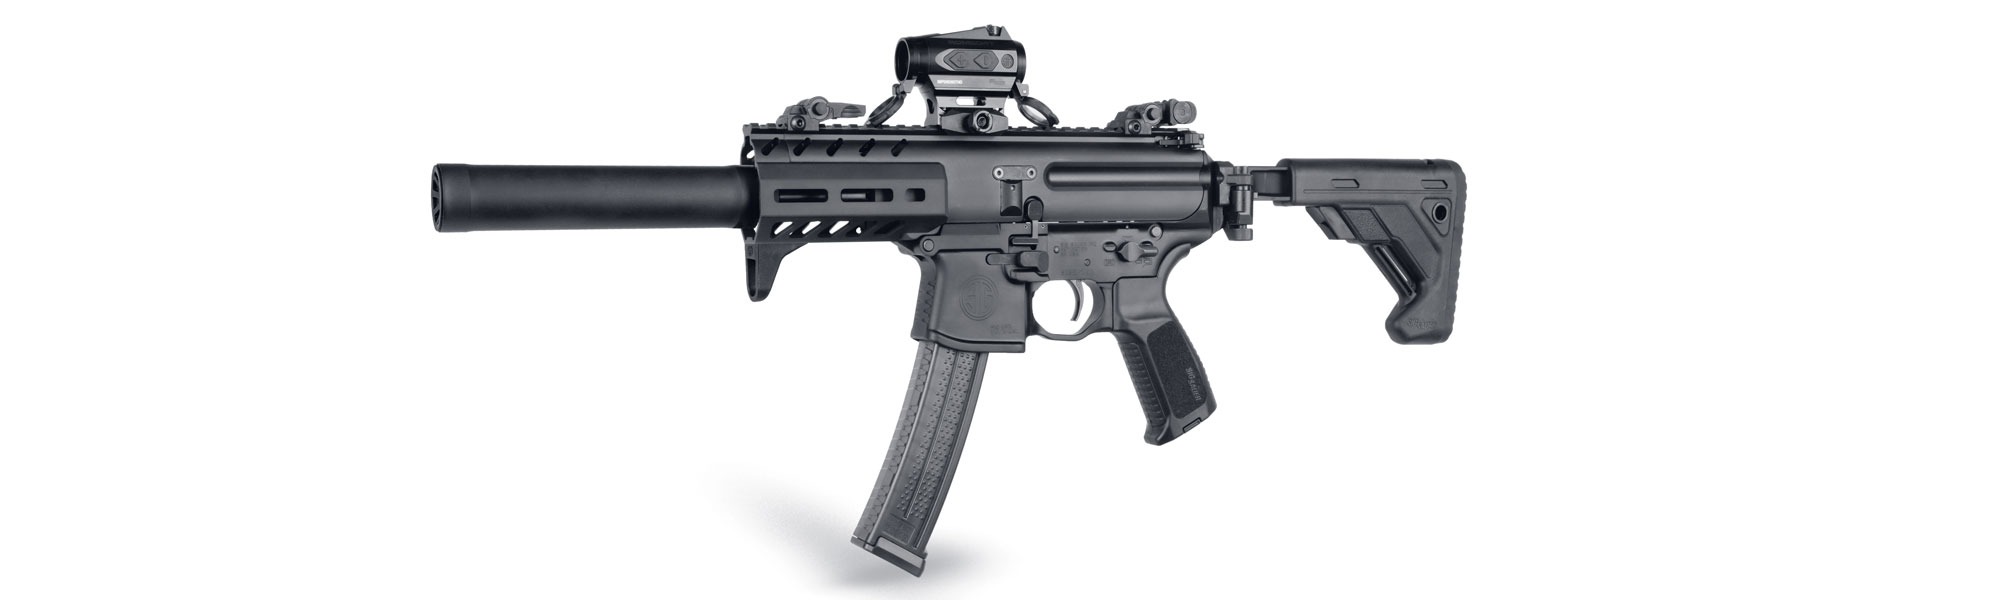 The  SIG MPX featured is the SIG MPX complete with optic and suppressor. 